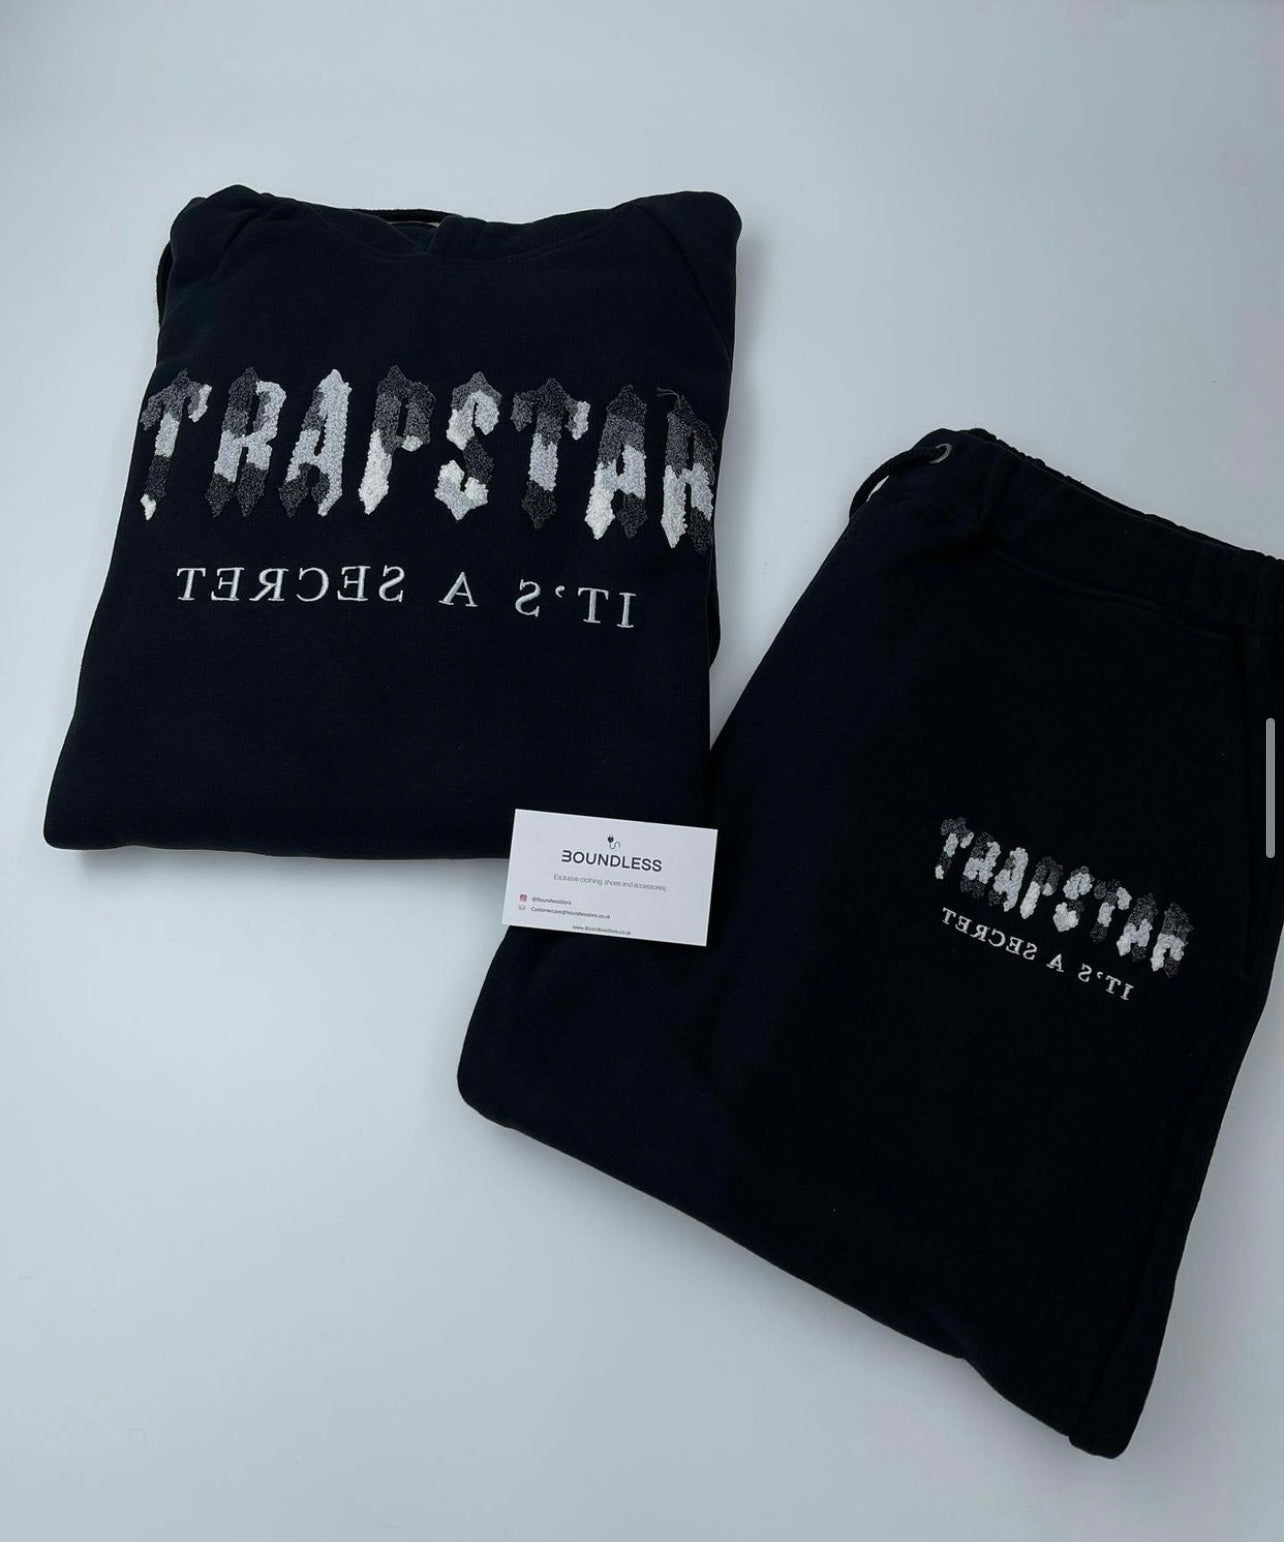 Trapstar – Boundless Store